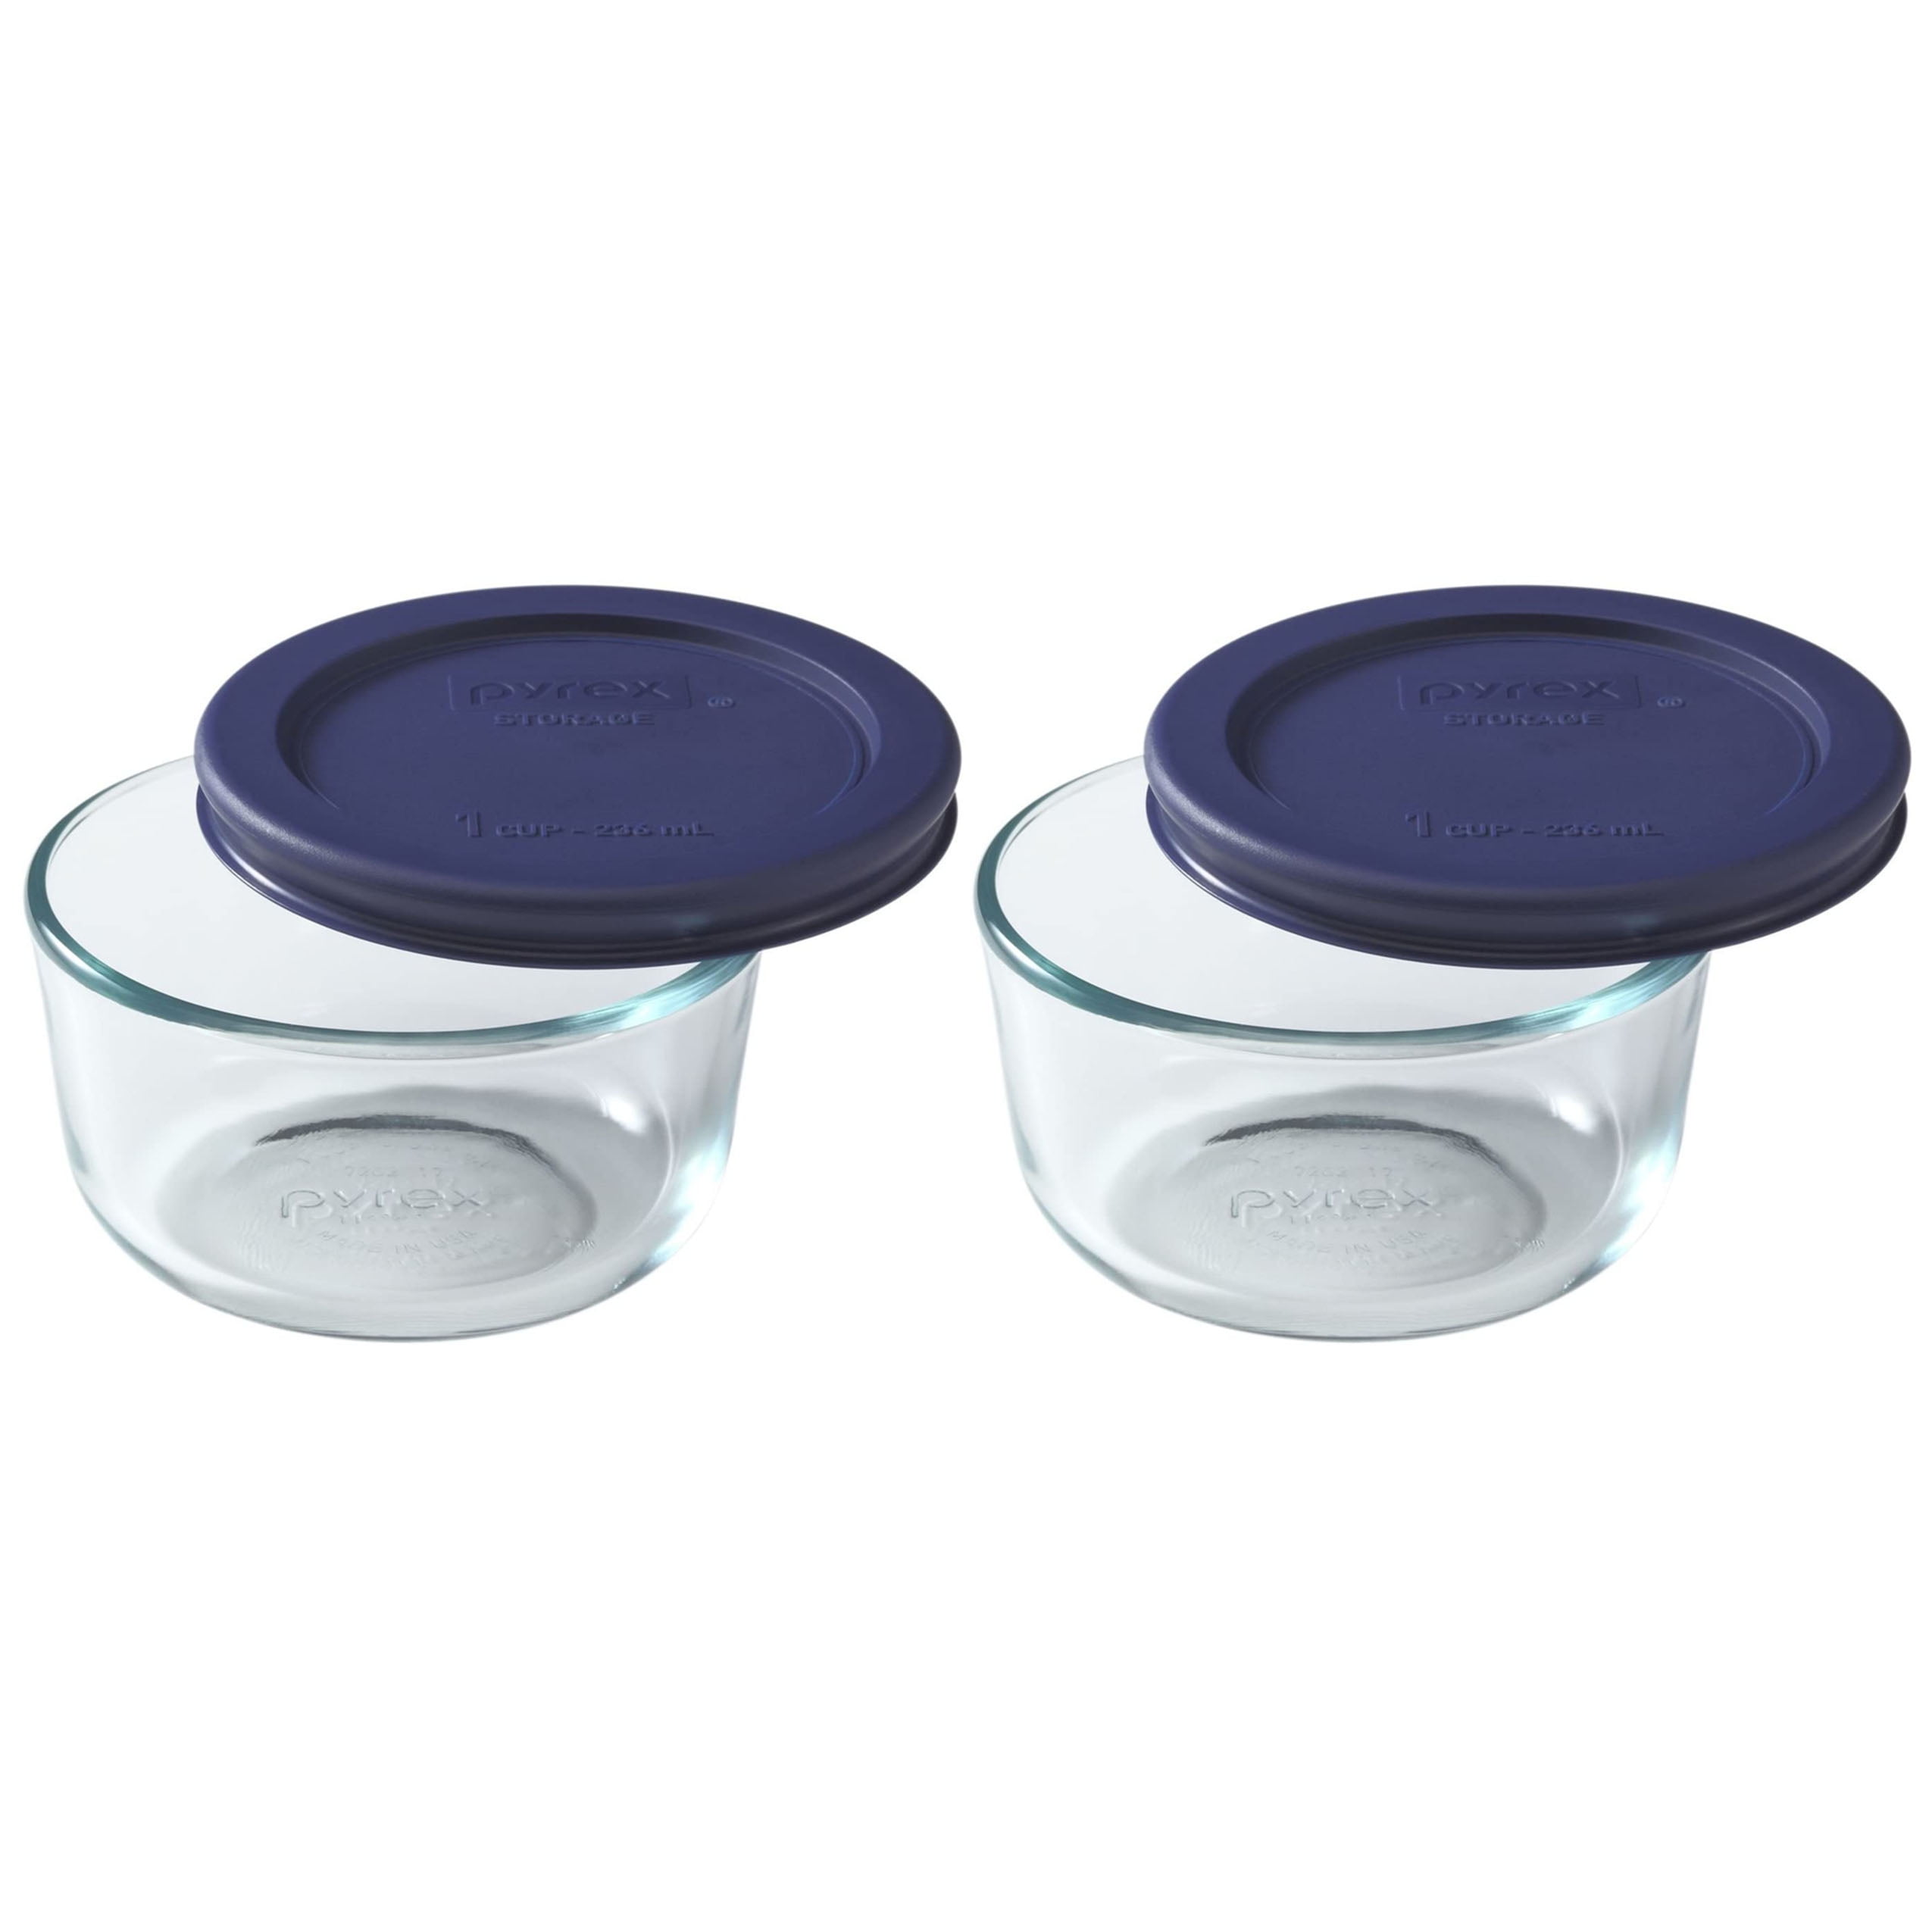 Set of 2 Deviled Egg Trays with Snap On Lids Holds 36 Eggs 18 Eggs Per Tray #FSNH 